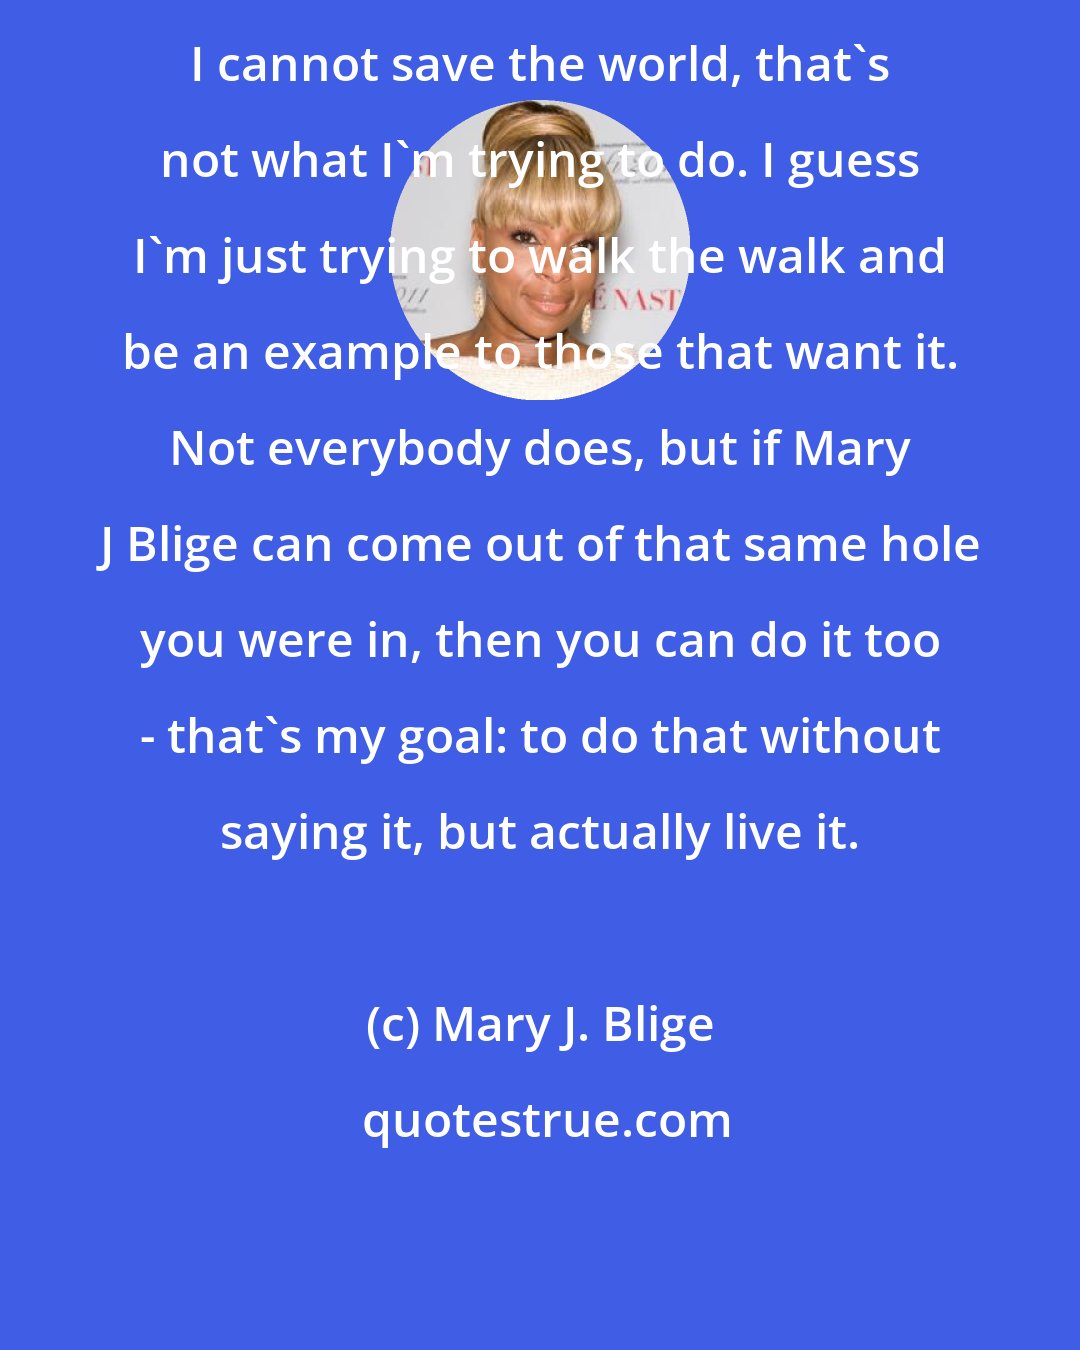 Mary J. Blige: I cannot save the world, that's not what I'm trying to do. I guess I'm just trying to walk the walk and be an example to those that want it. Not everybody does, but if Mary J Blige can come out of that same hole you were in, then you can do it too - that's my goal: to do that without saying it, but actually live it.